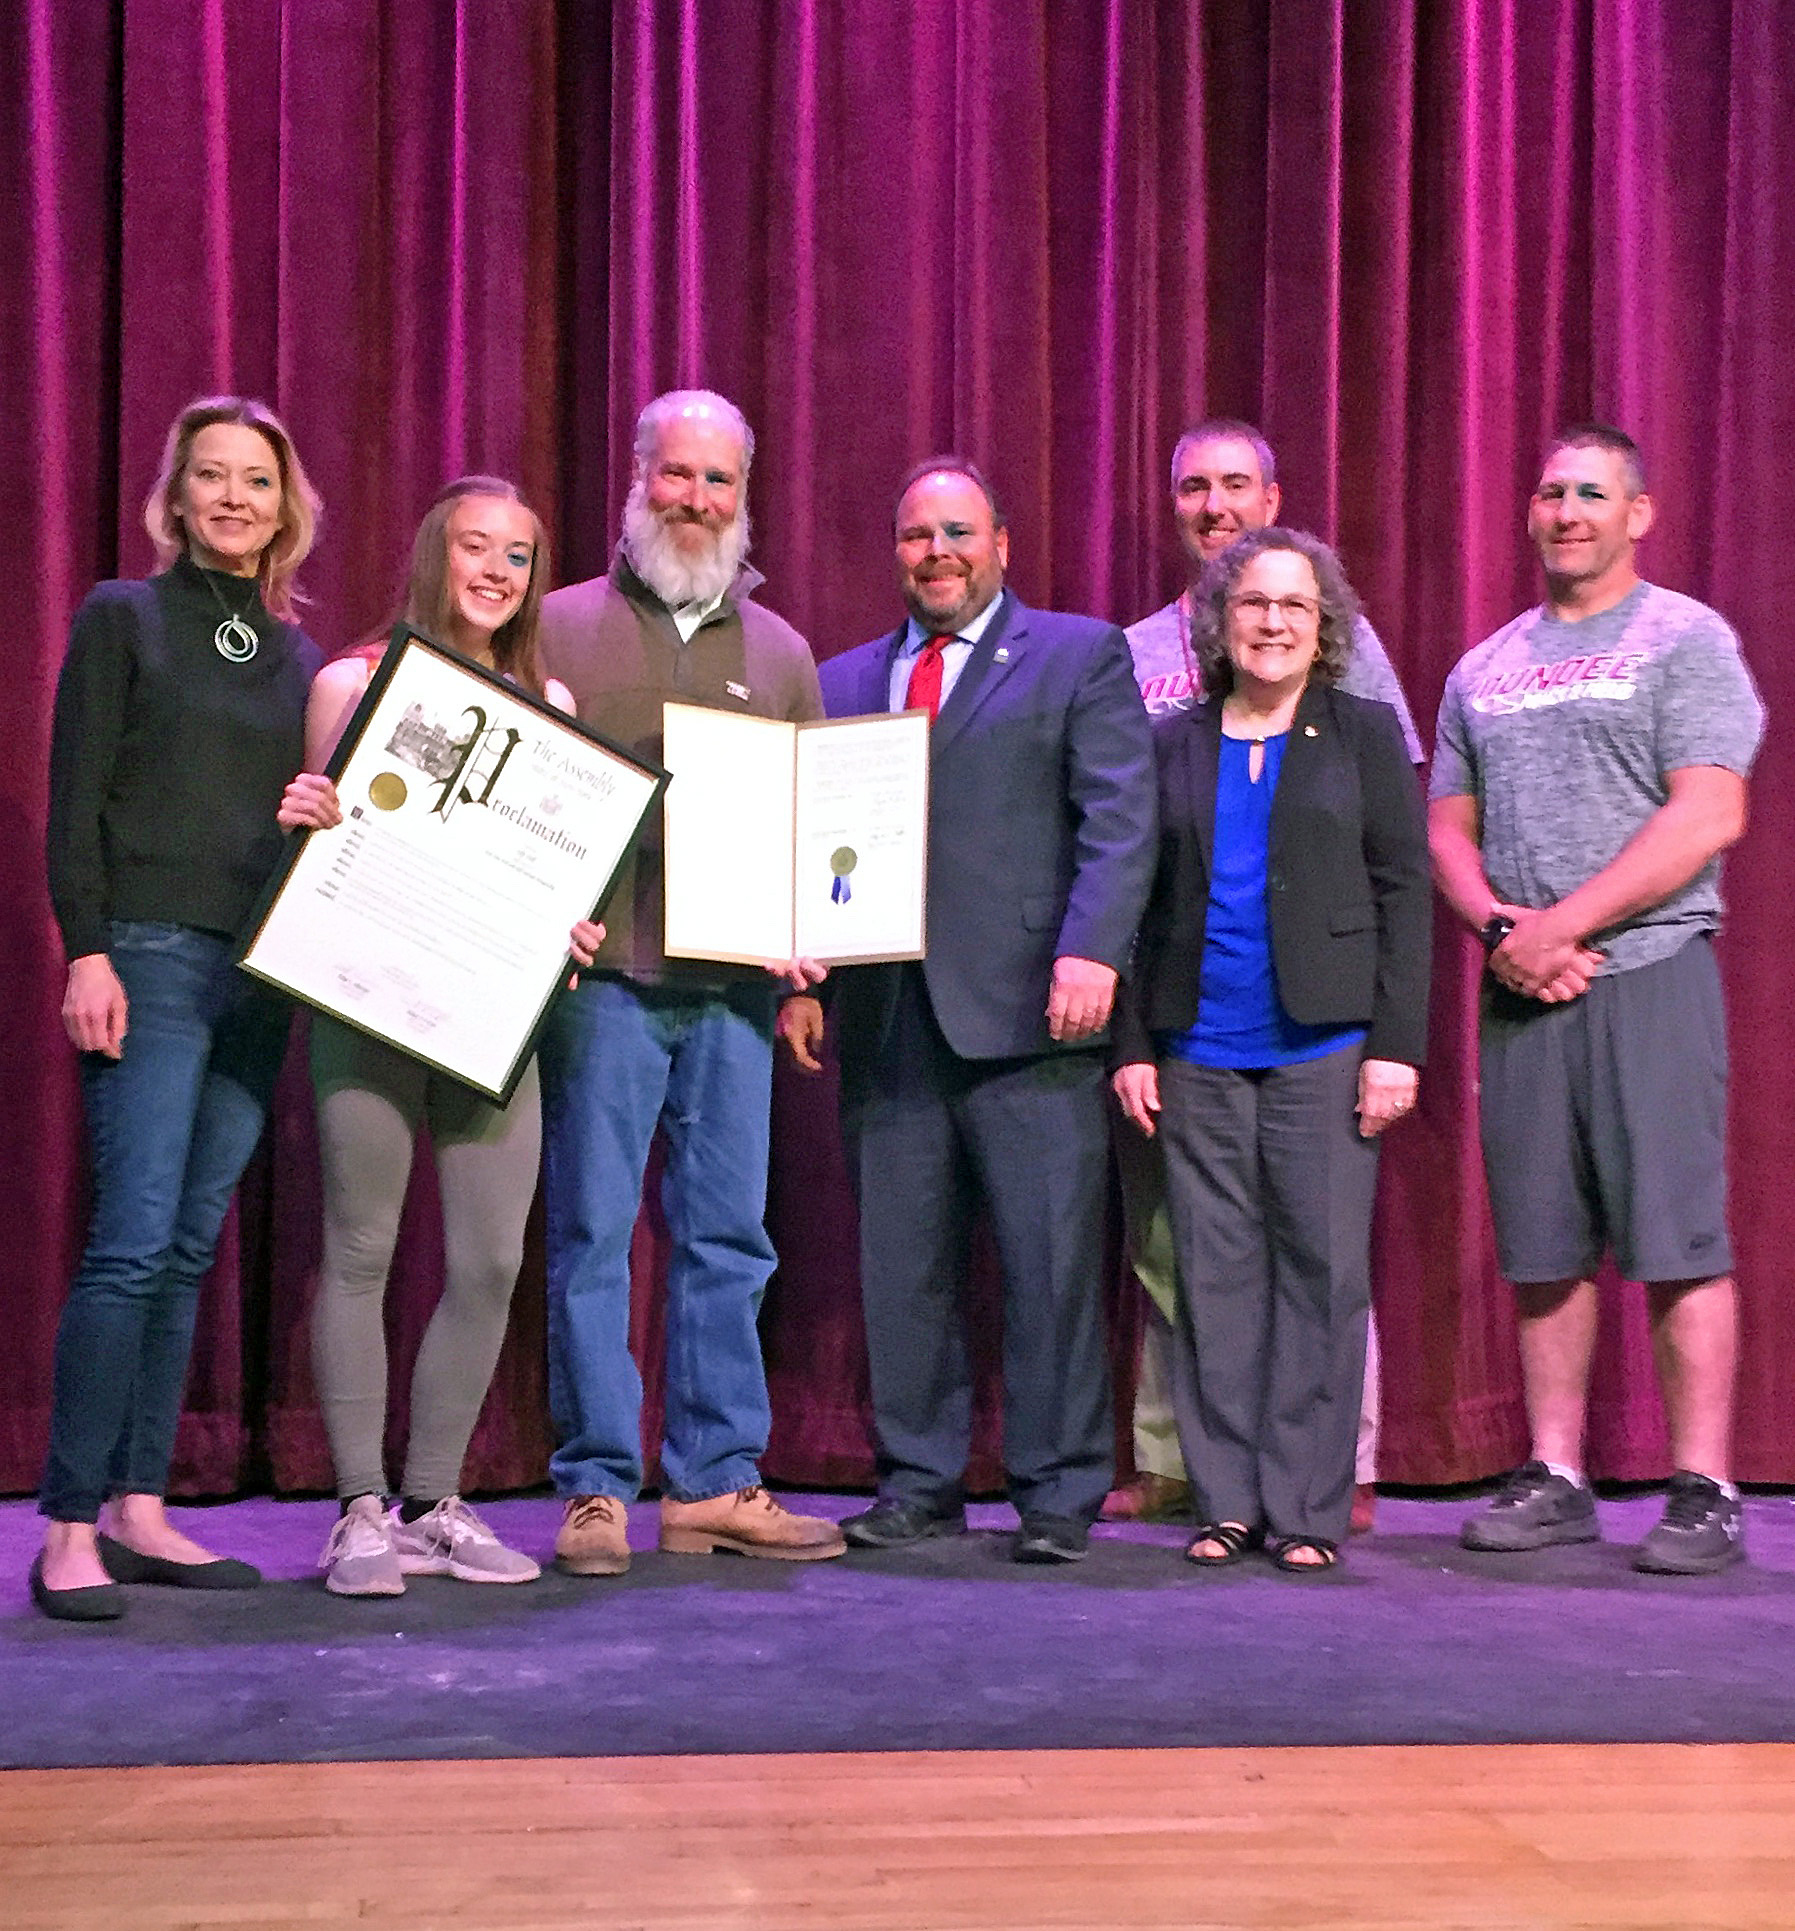 From left to right: Macy Hall, Lily’s mother, Lily, Lily’s father William Hall, Assemblyman Palmesano, Varsity Boys’ Track Coach Scott Shepardson, Sharon Sitrin-Moore, and Varsity Girls